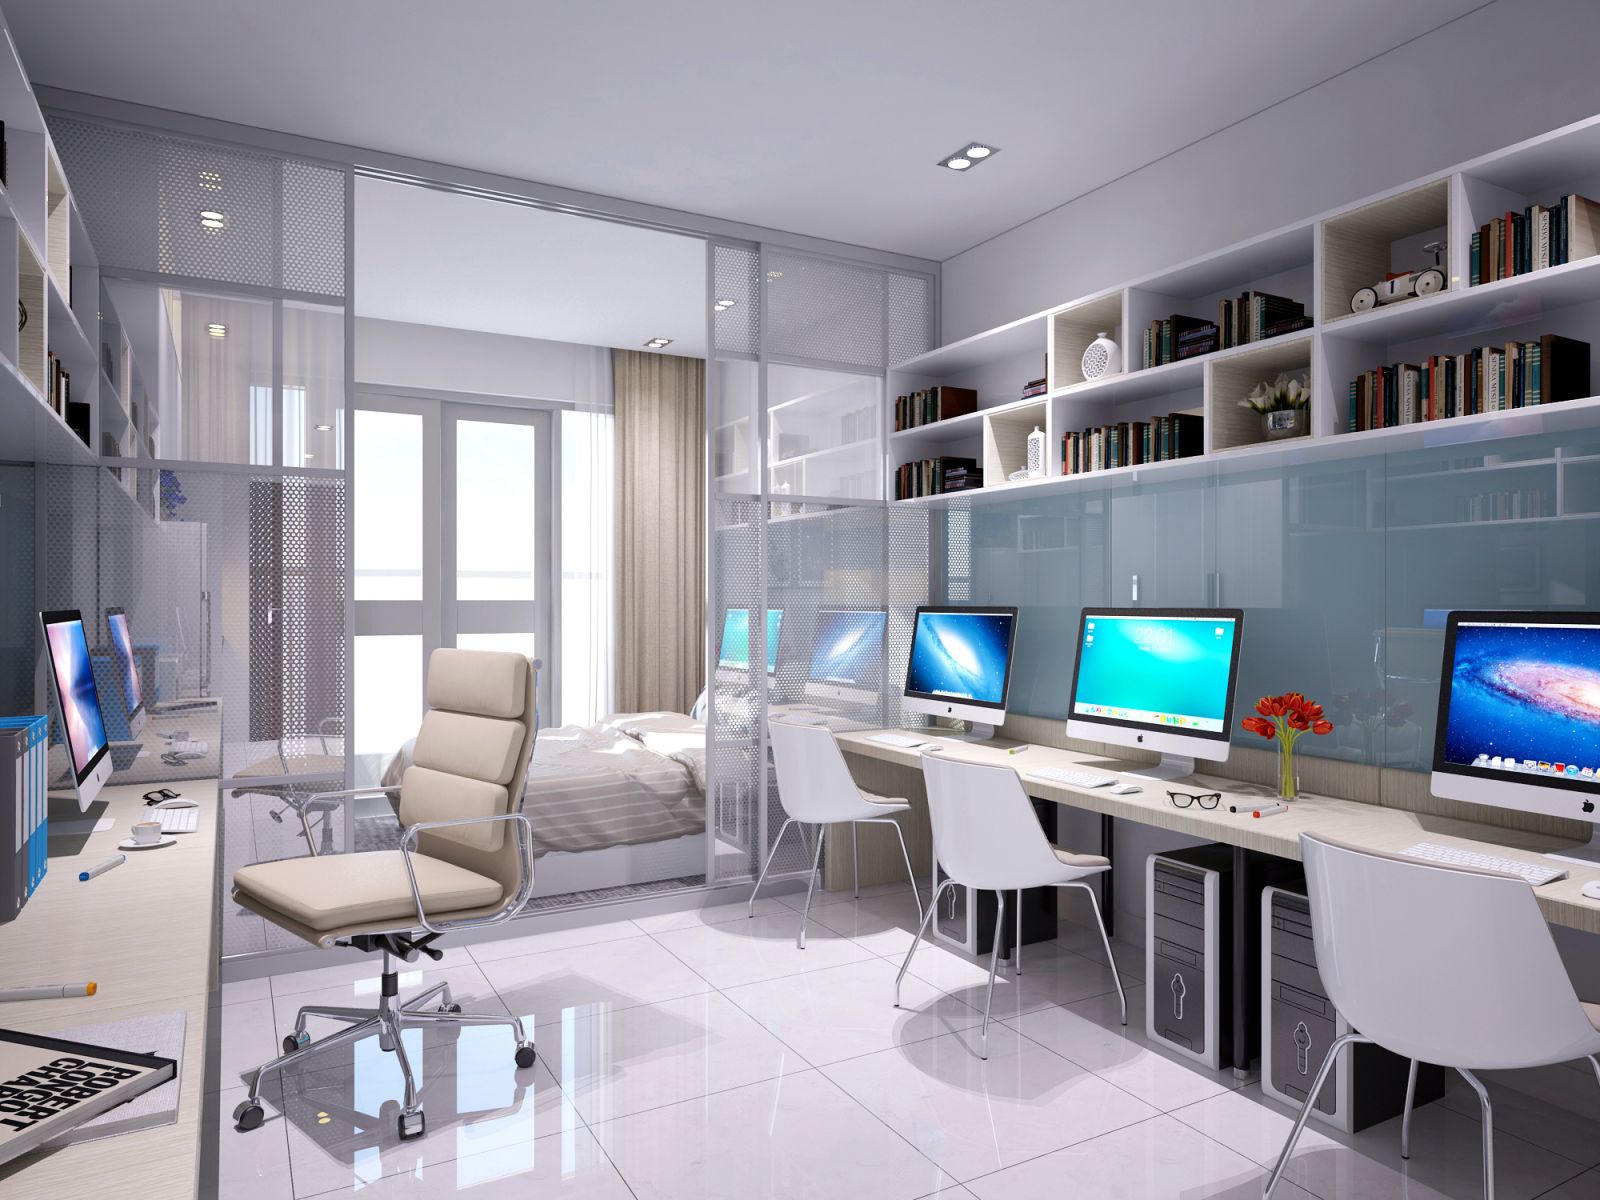 A look at the interior of an officetel unit. The Ministry of Construction has encountered a host of difficulties in researching and drafting a circular on regulations for developing and managing the office-tel segment. (Photo: TL